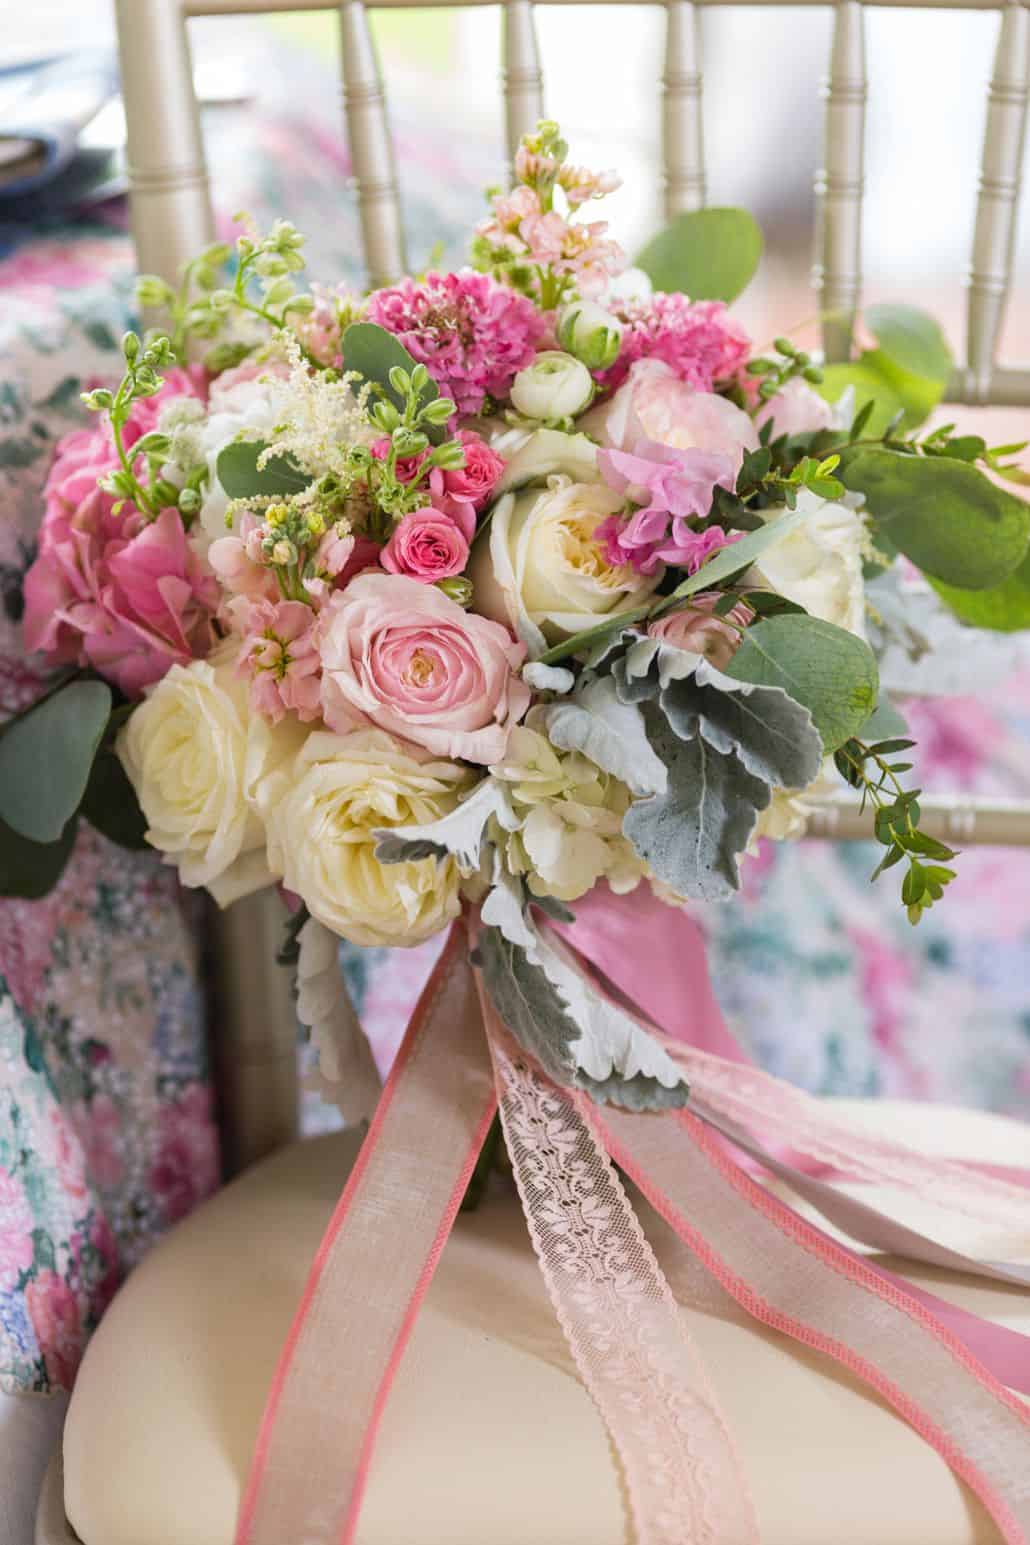 Pink, cream and sage bridal bouquet trailed by pink and cream lace ribbon on silver chiavari chair. Kristin Rockhill florist, Chauncey center Princeton, NJ wedding photographer